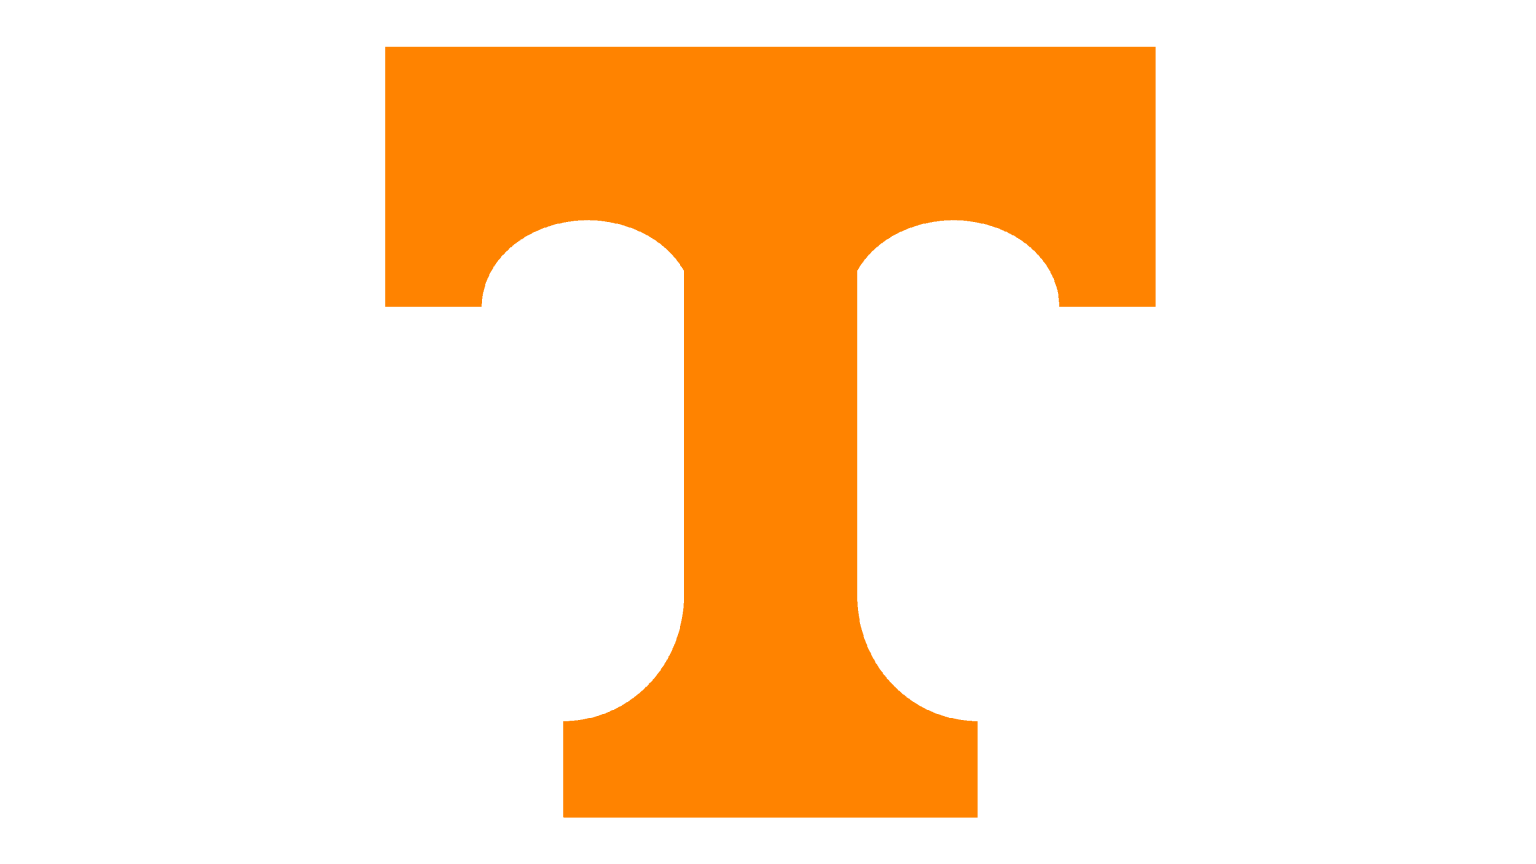 Tennessee Volunteers Logo and symbol, meaning, history, sign.